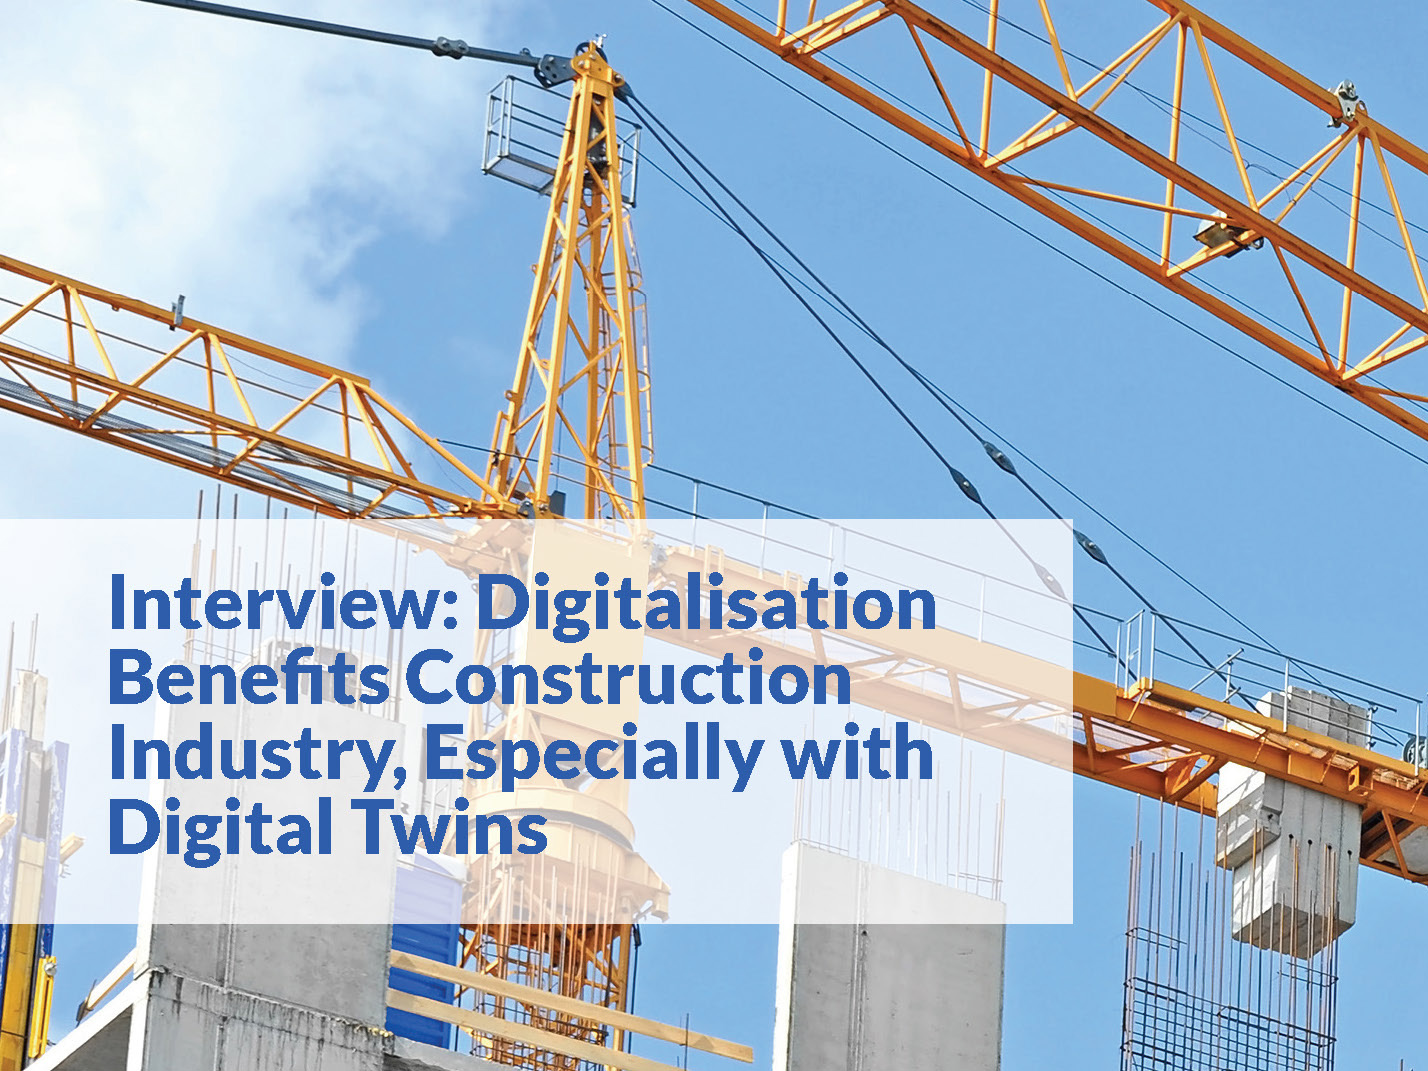 Digitalisation Benefits Construction Industry, Especially with Digital Twins